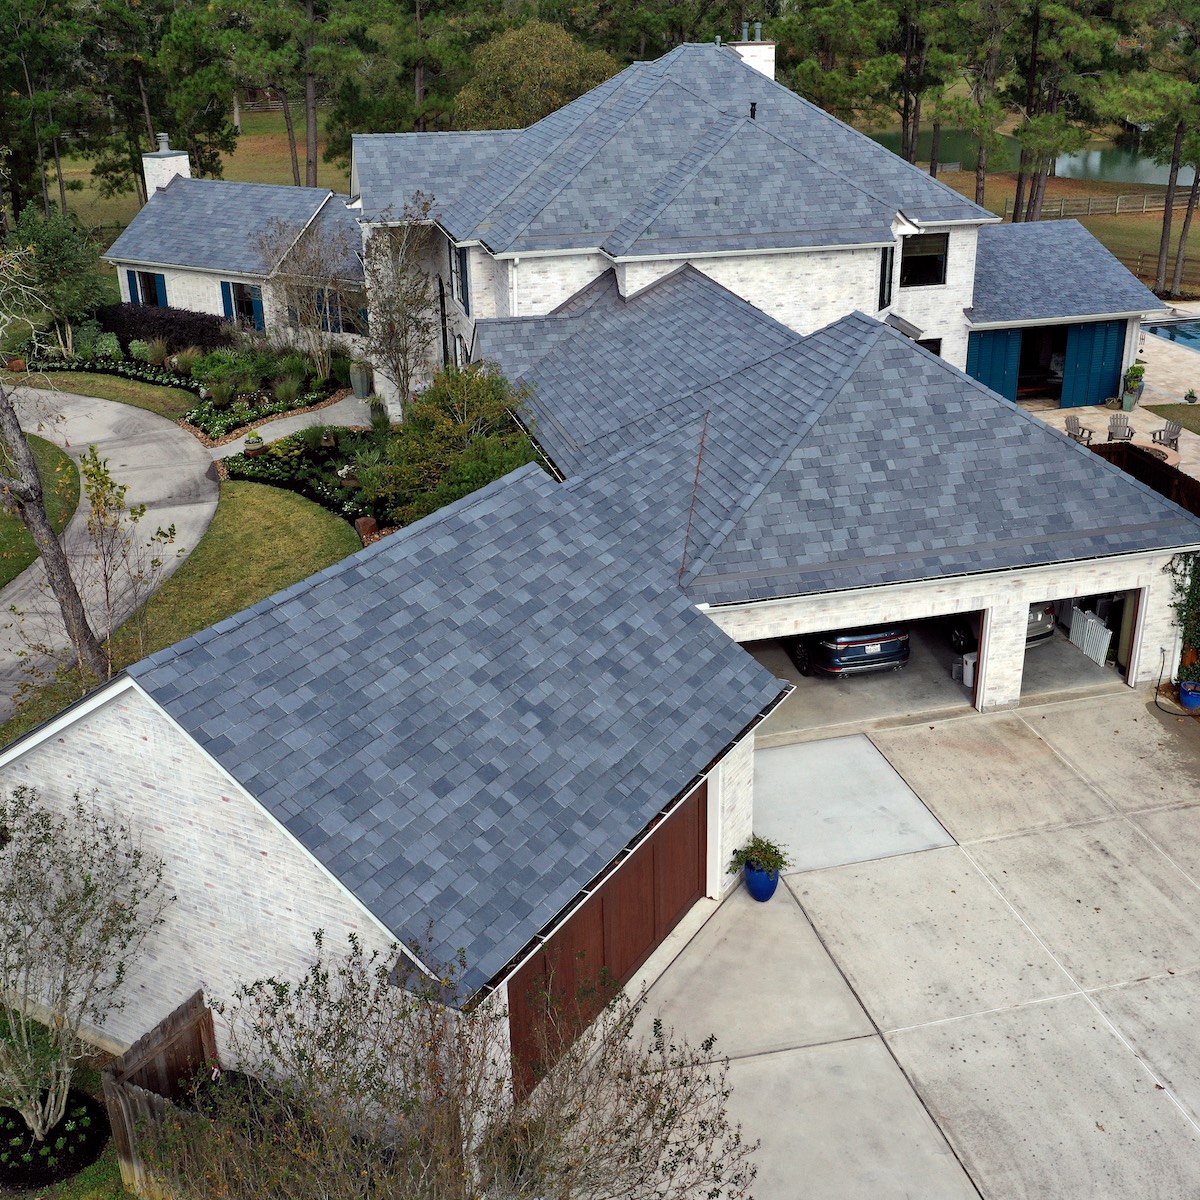 Newly installed DaVinci roofing shingles